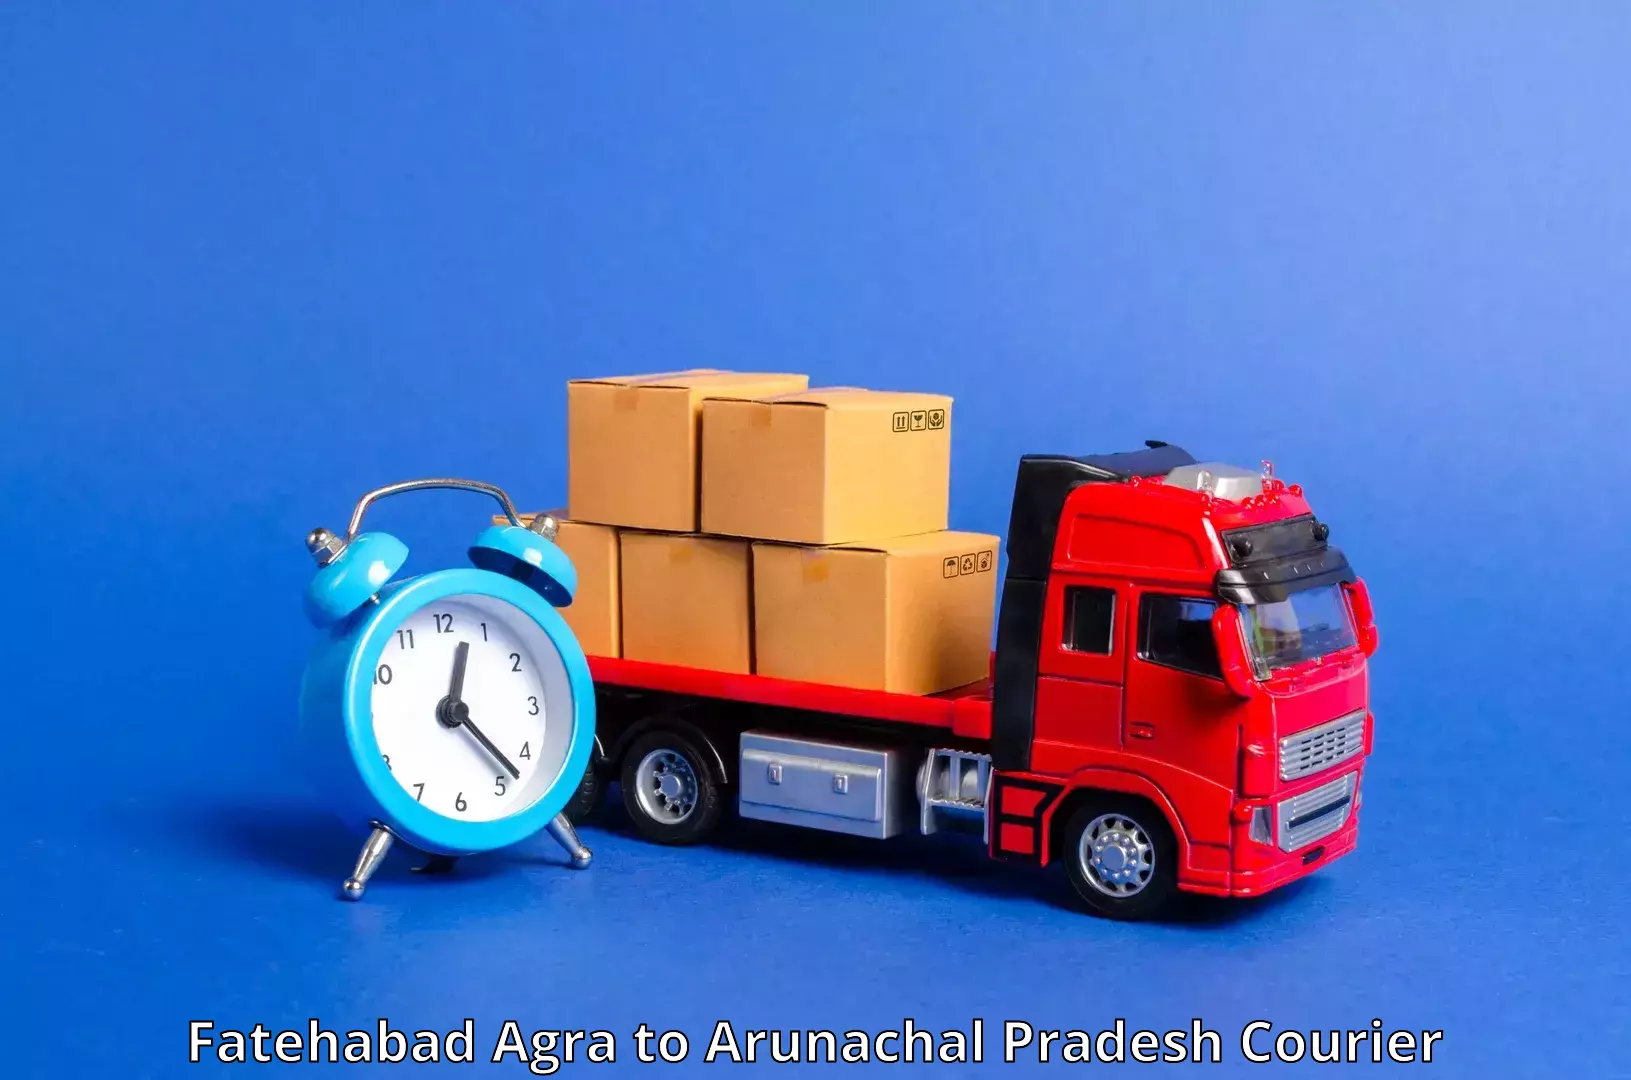 Domestic courier Fatehabad Agra to Lower Dibang Valley